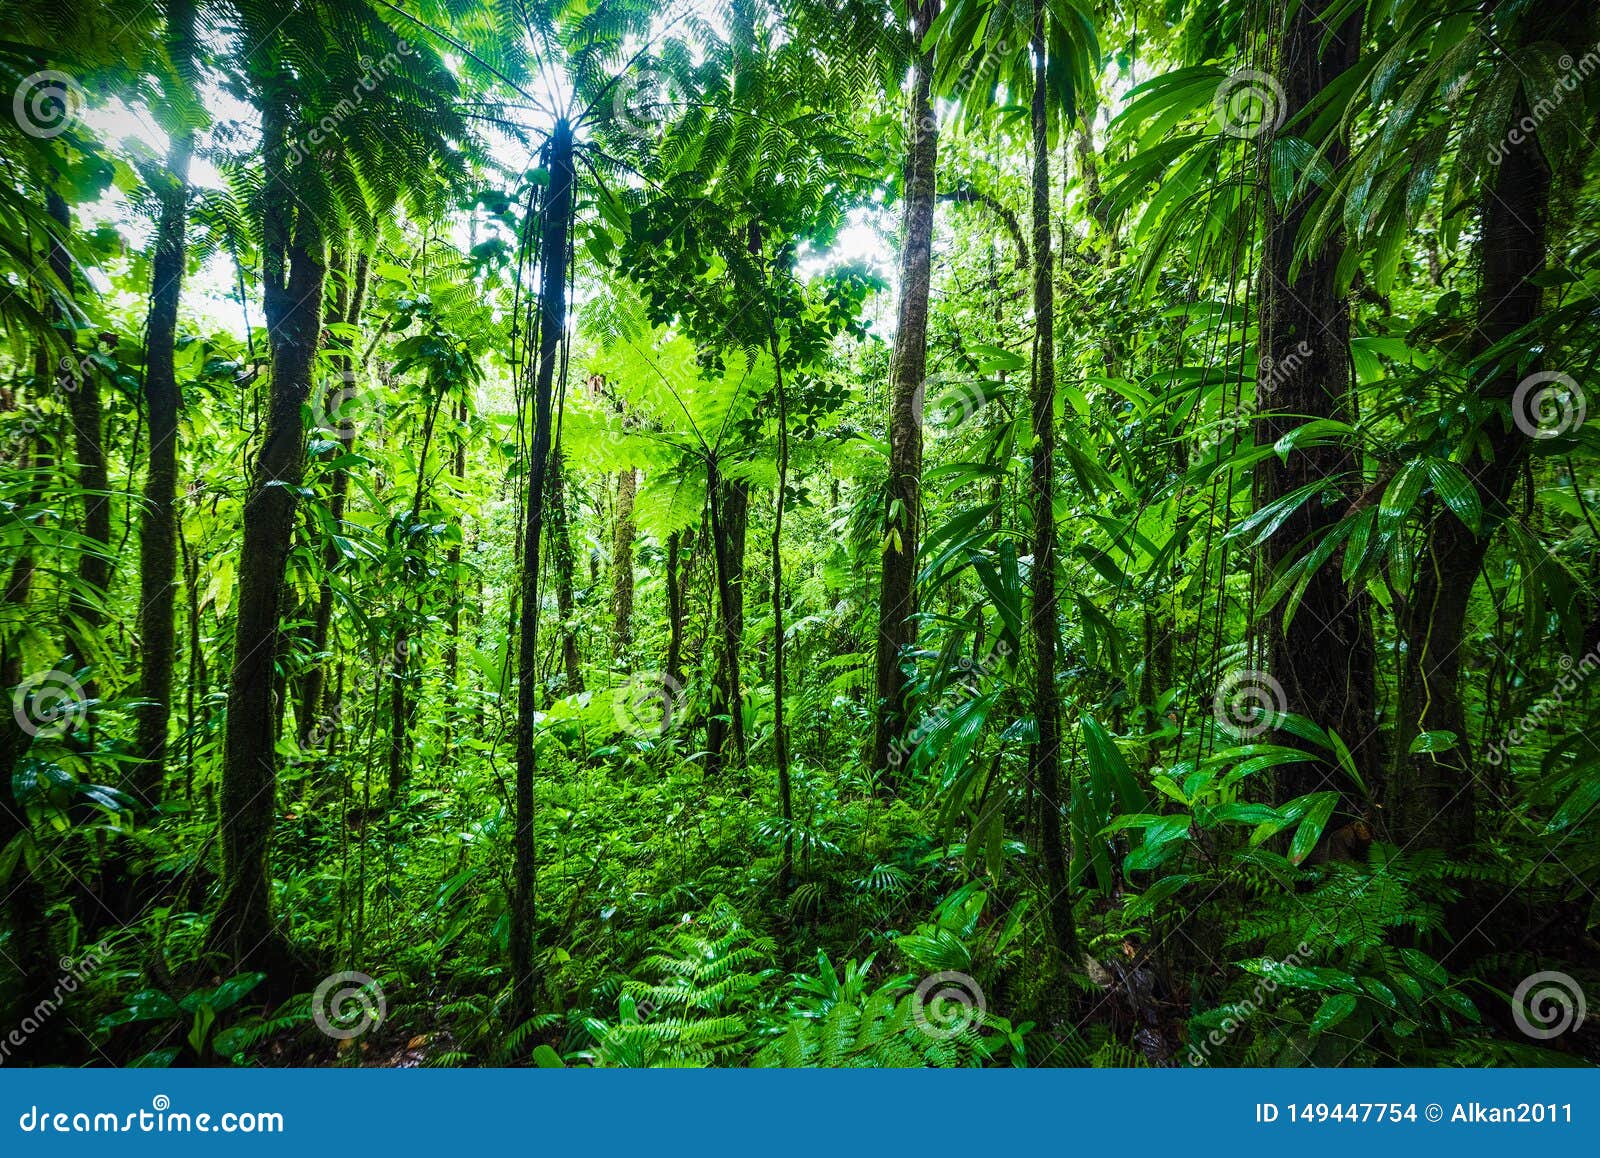 thick vegetation in guadeloupe jungle